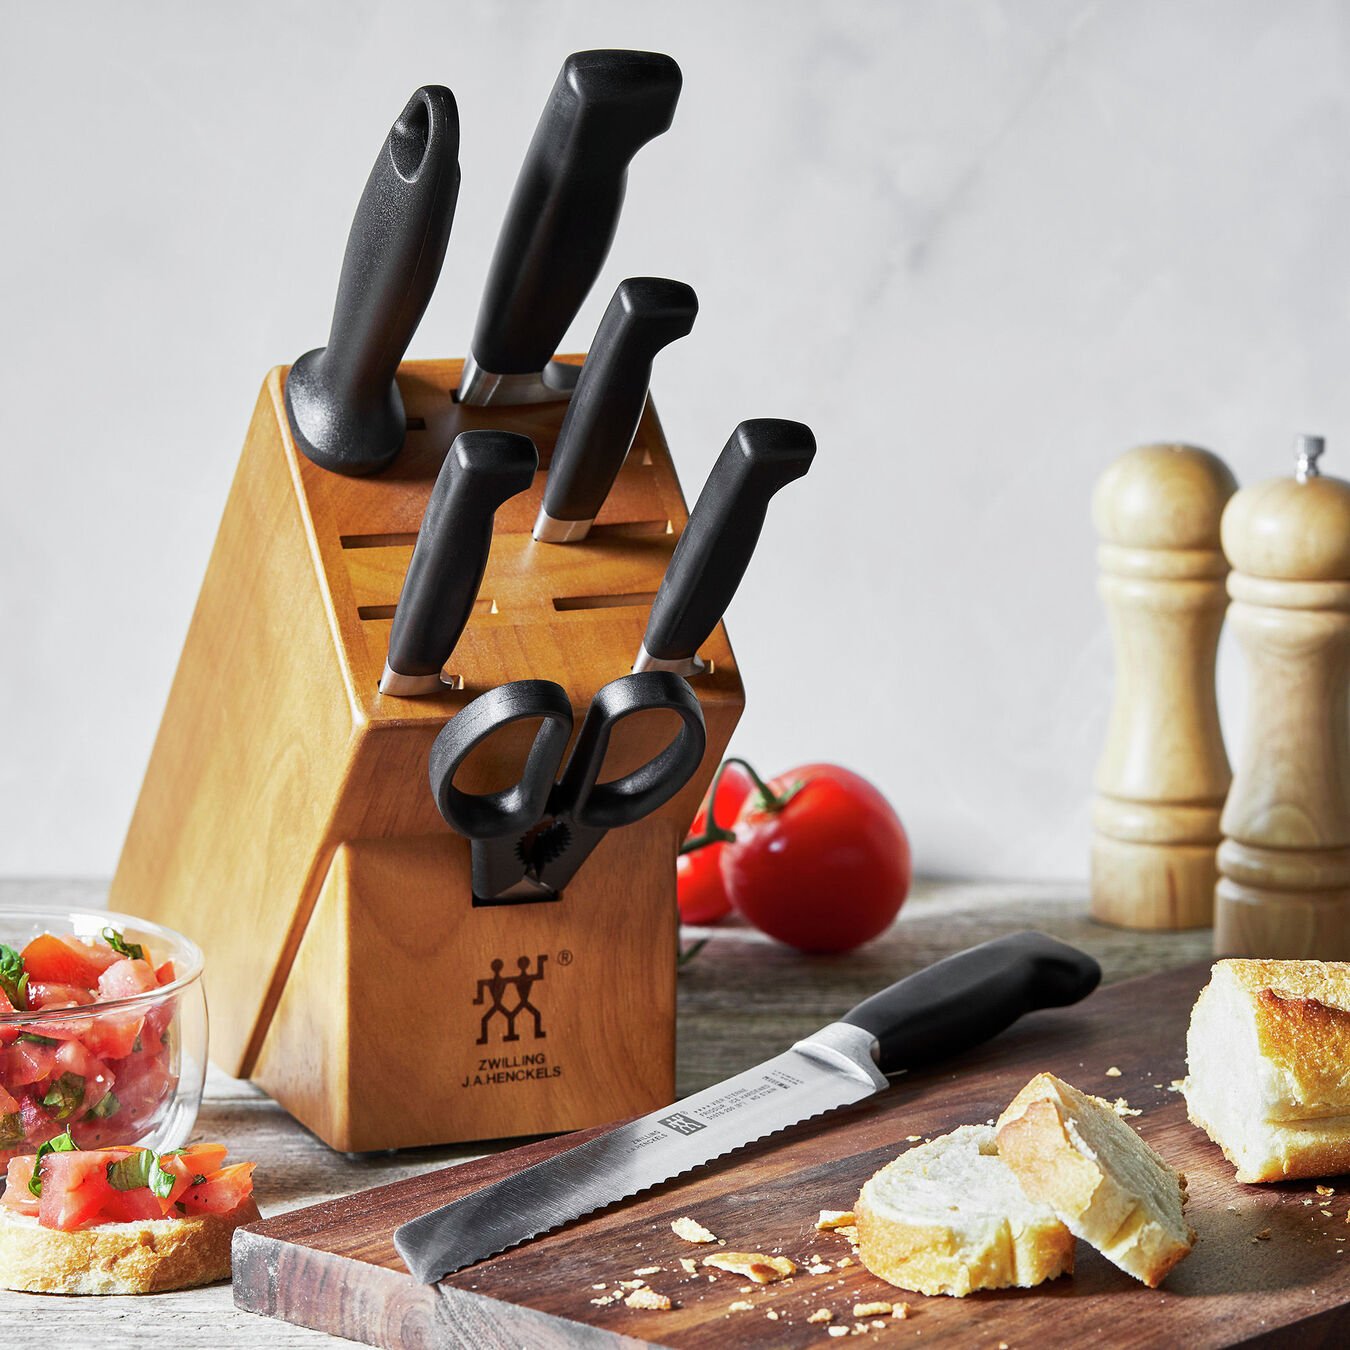 knife block in kitchen scene with cutting board, salt and pepper grinder, and sliced bread and tomatoes